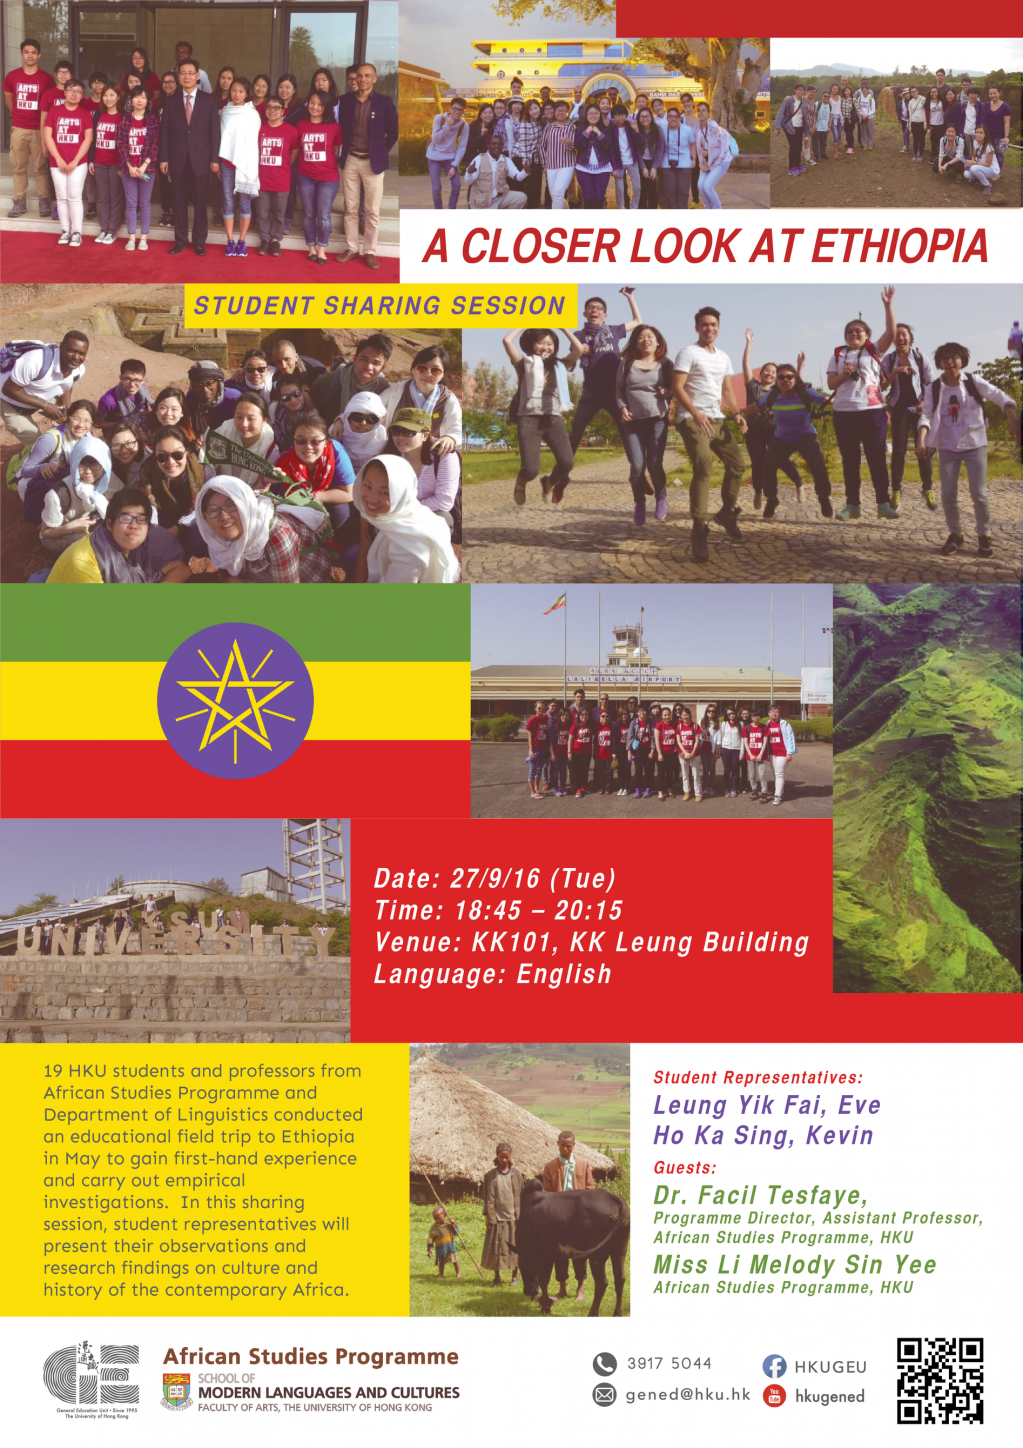 A Closer Look at Ethiopia: Visit of HKU Students 